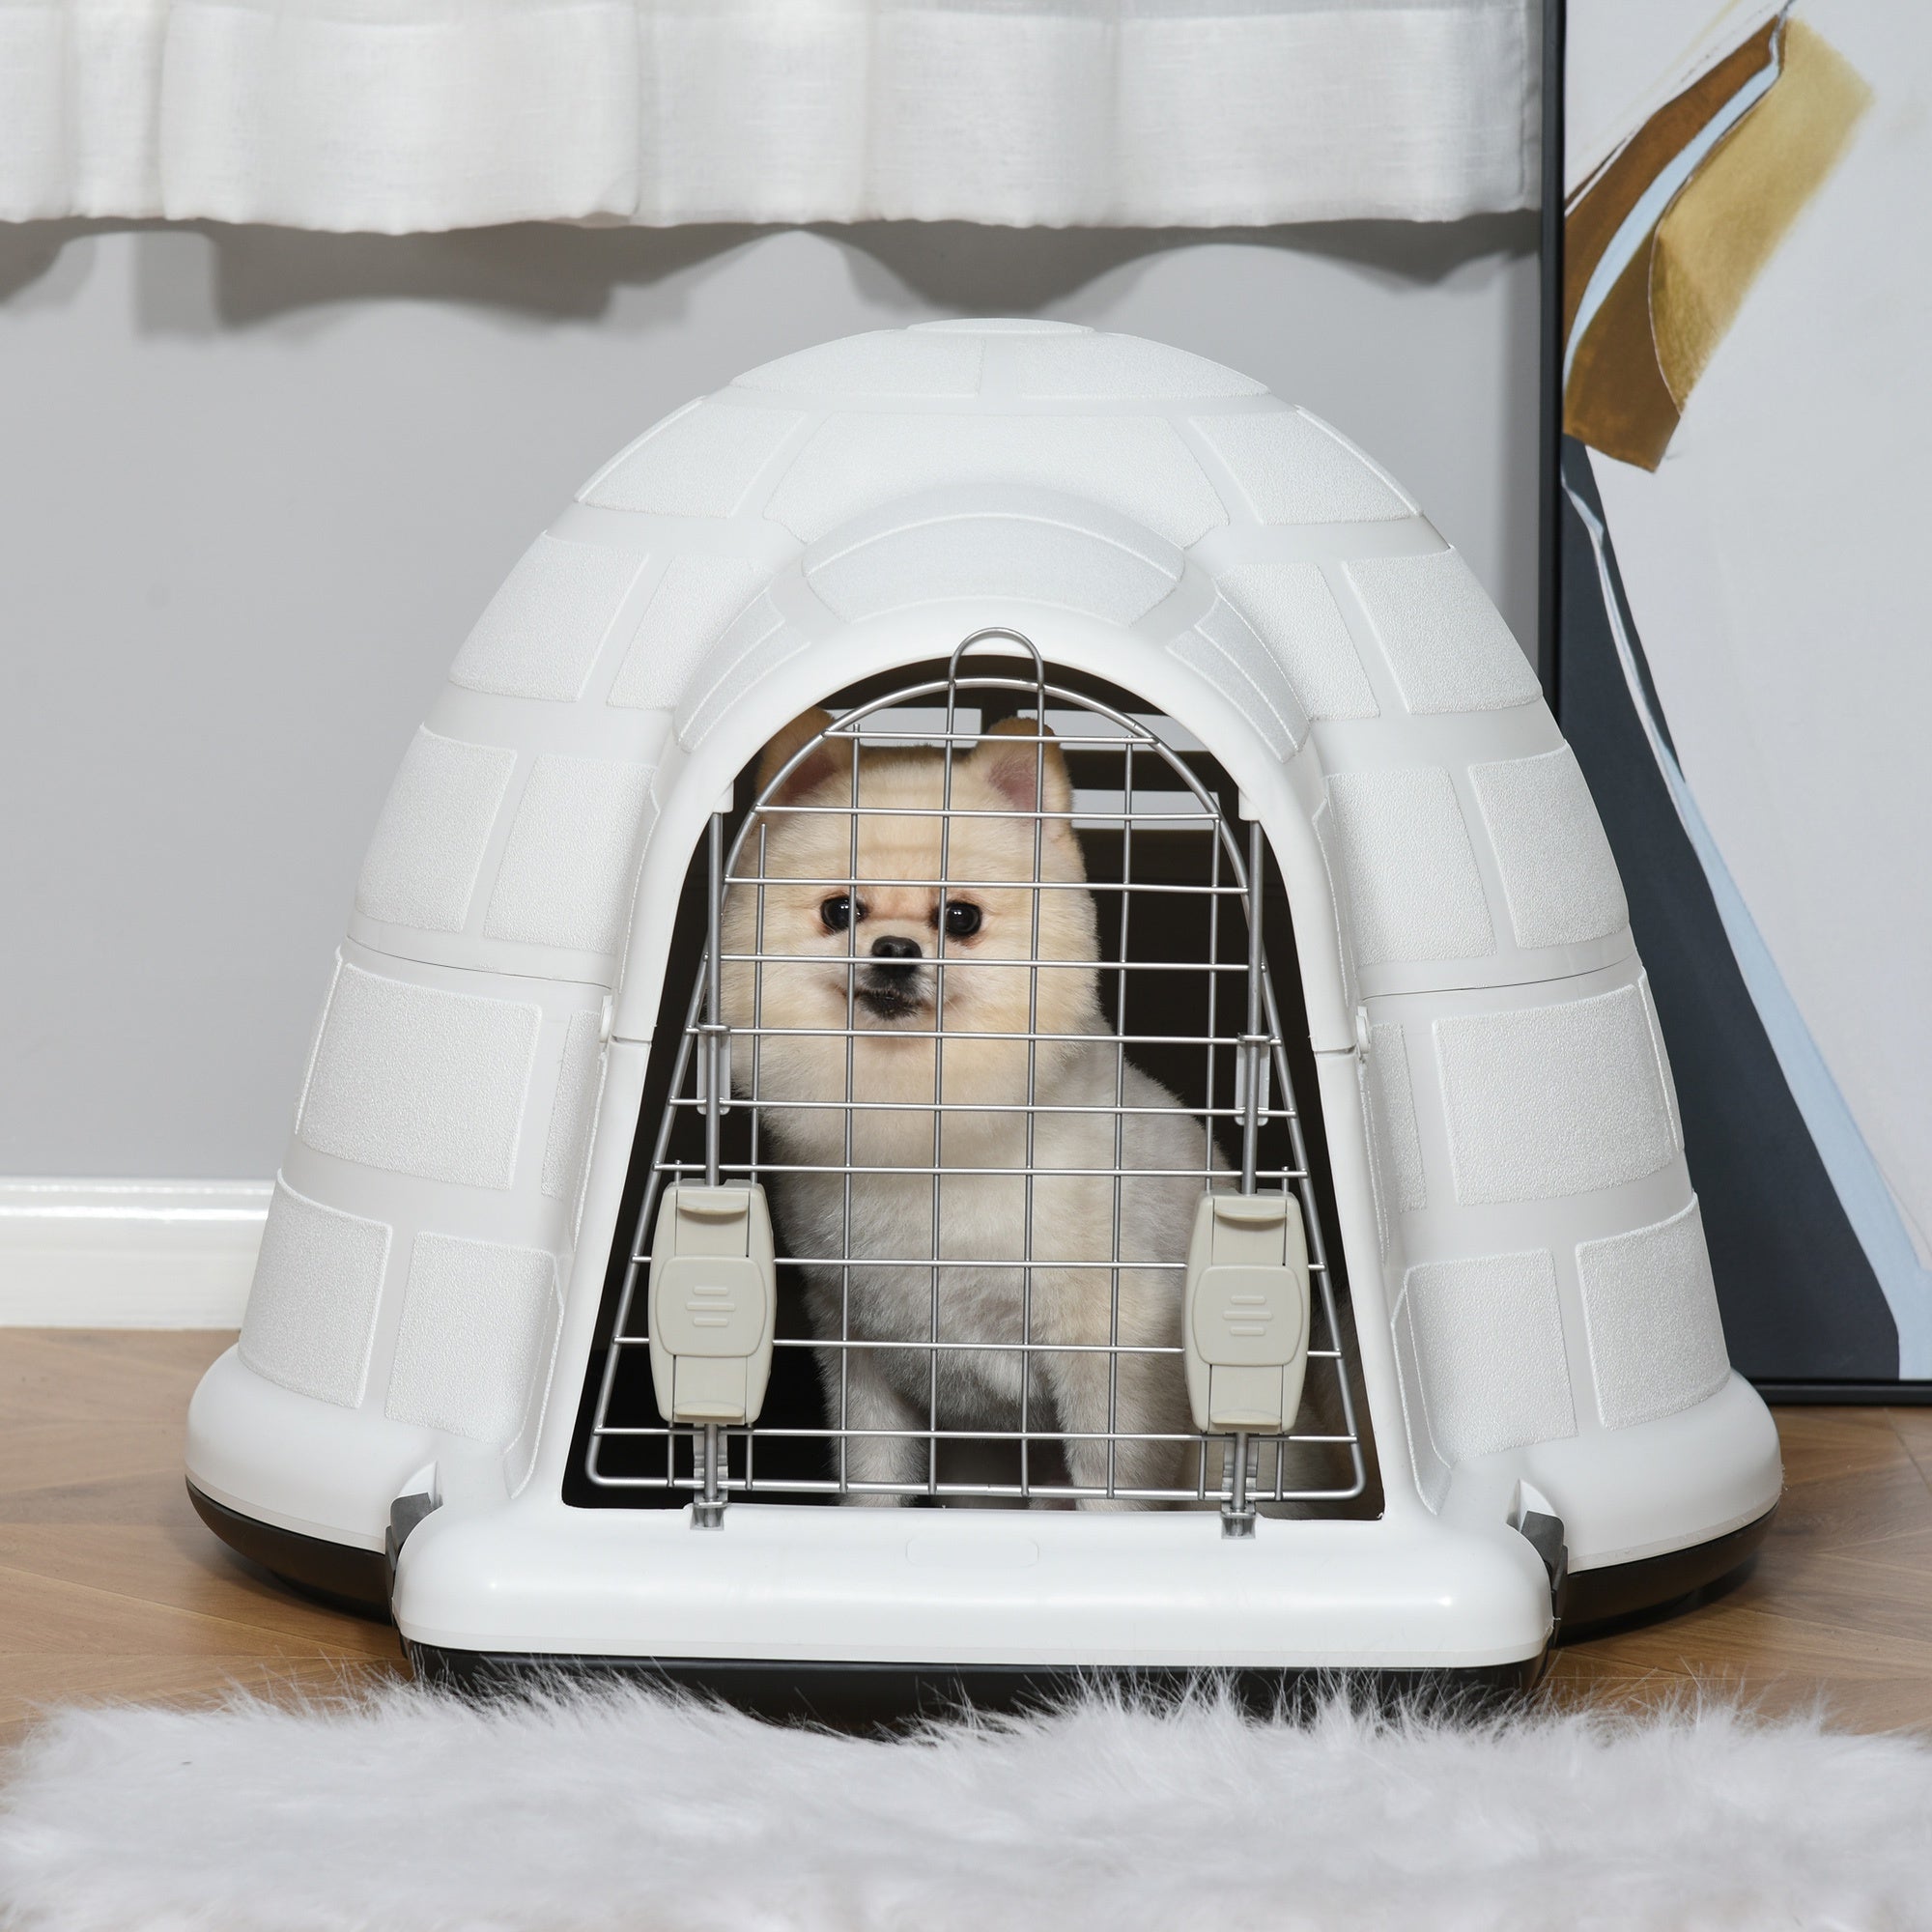 Plastic Igloo Dog House Puppy Kennel Pet Shelter w/ Windows for Small Sized Dogs